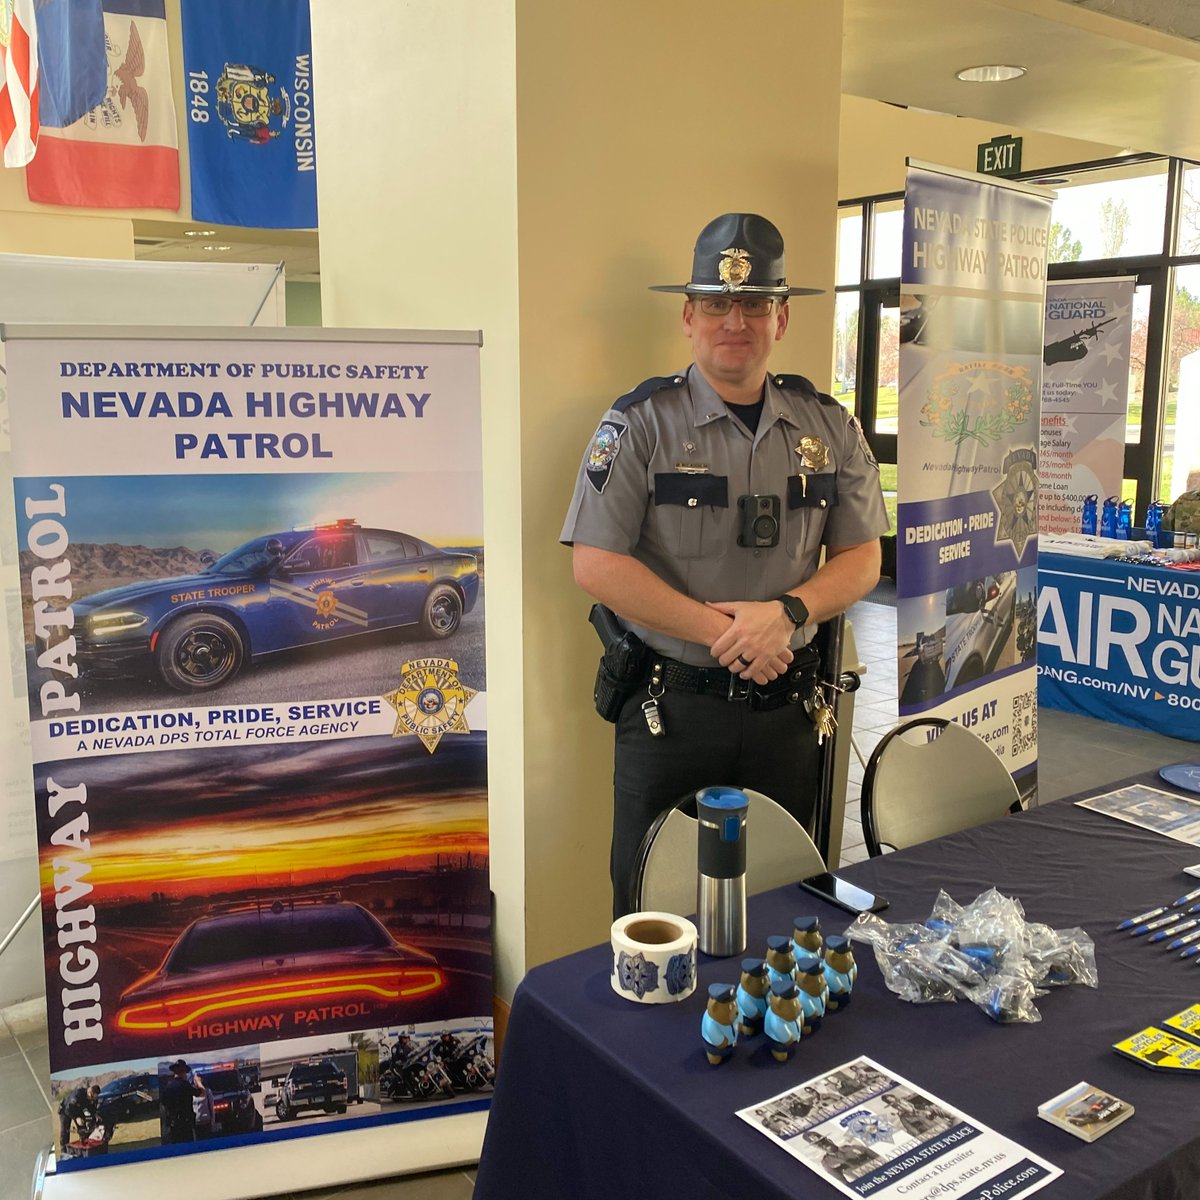 Great to be in Elko at the Great Basin College Career Fair this past week! We’re hiring statewide! Connect with a recruitment officer today by visiting NevadaStatePolice.com or emailing careers@dps.state.nv.us